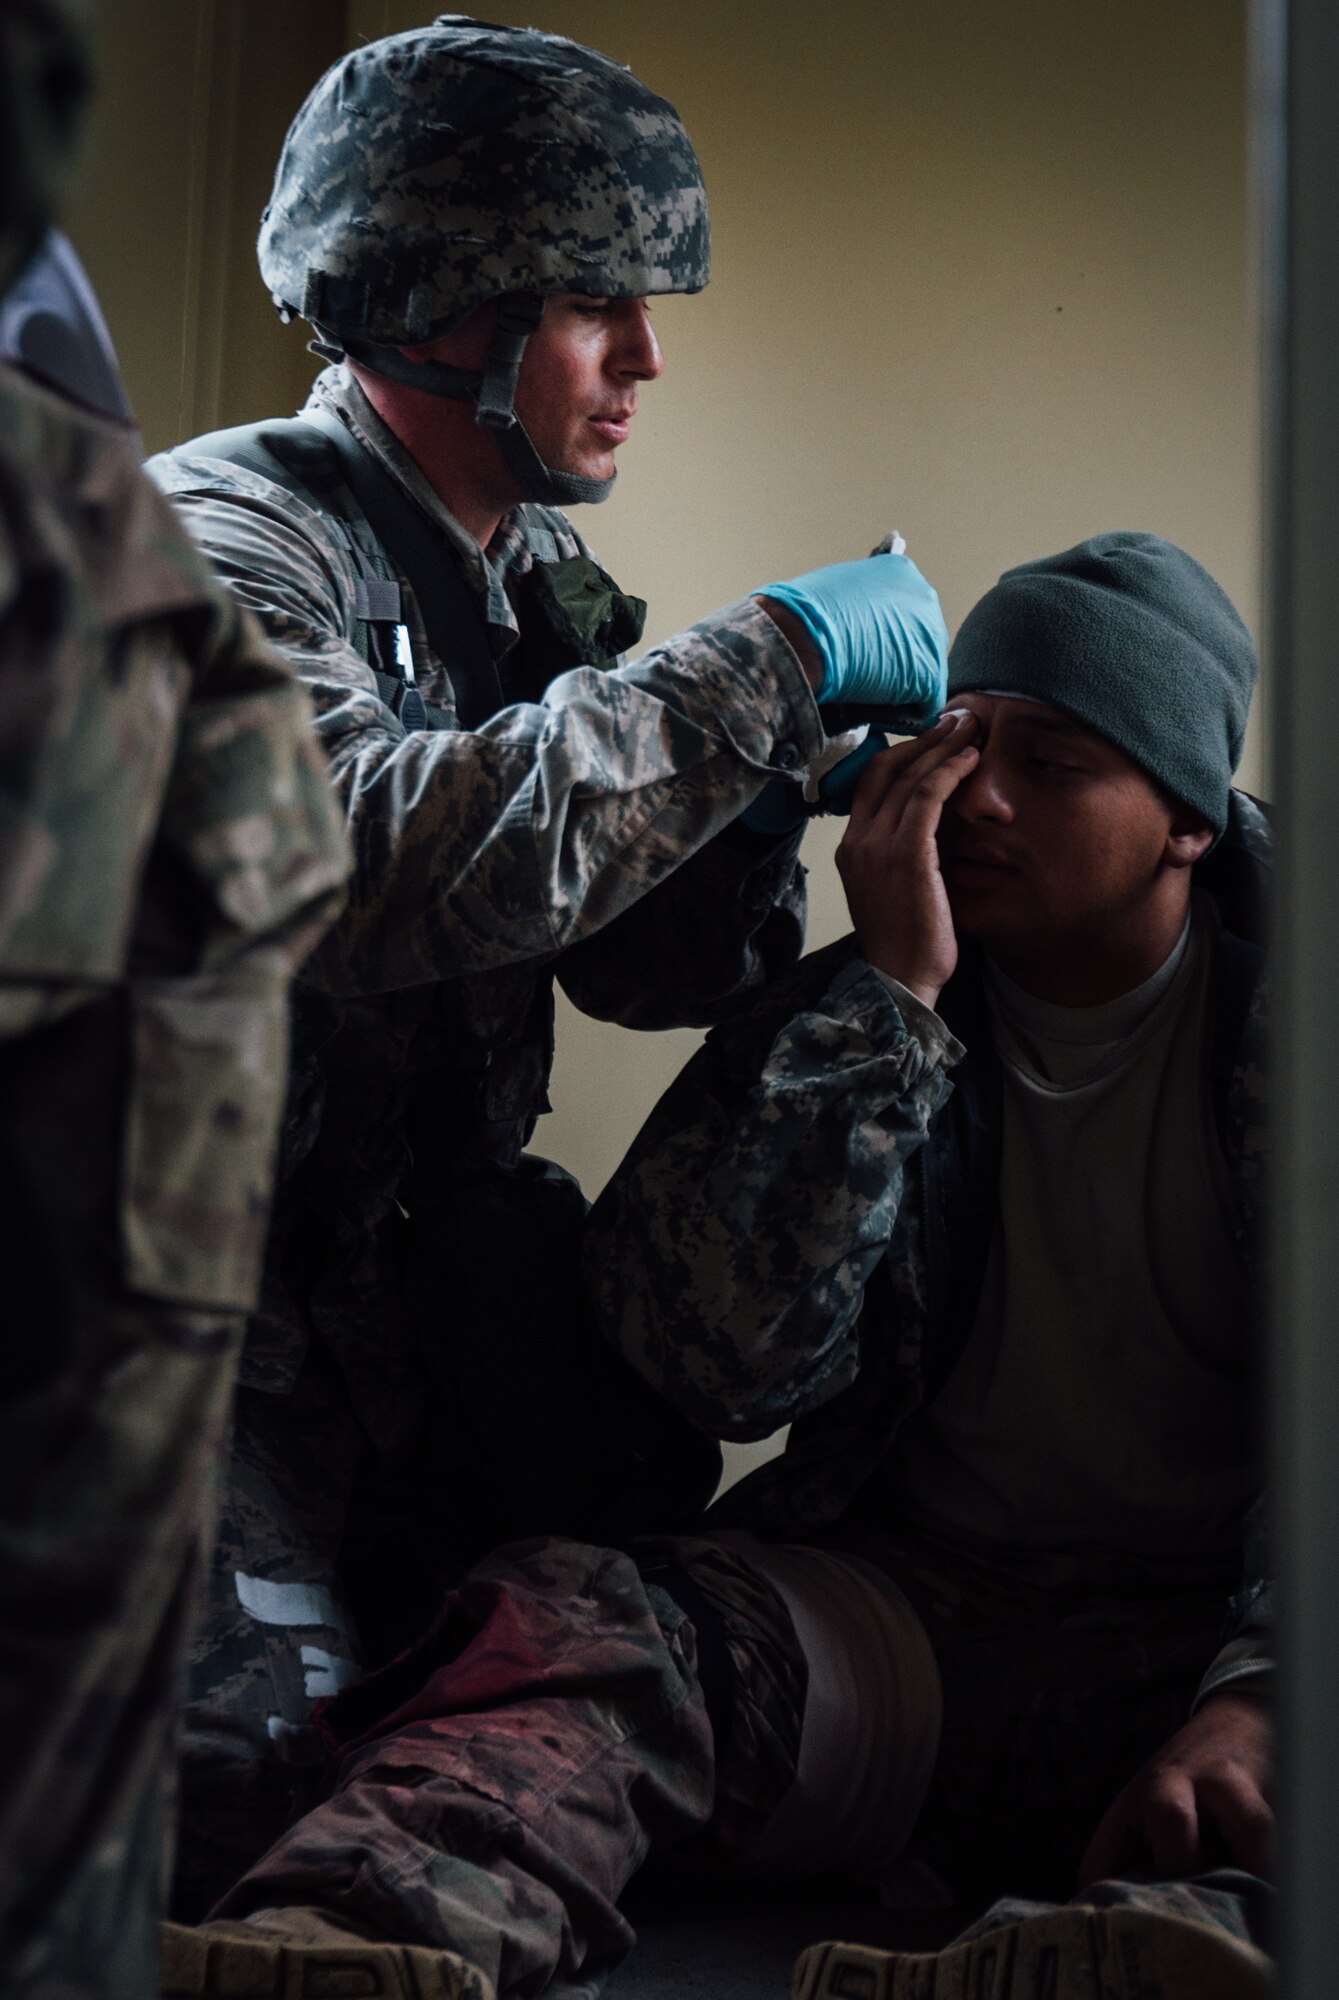 Capt. Ryan Garabrandt, 446th Aeromedical Staging Squadron Expert Field Medic Badge candidate, provides medical care to an injured simulated patient during the EFMBvcourse while a cadre grades him at Joint Base Lewis-McChord, Wash., Sept. 25, 2015. In June 1965, the U.S. Army expanded its awards program by implementing the EFMB for combat medics who do not see battle. (U.S. Air Force photo by Senior Airman Jordan Castelan/Released)